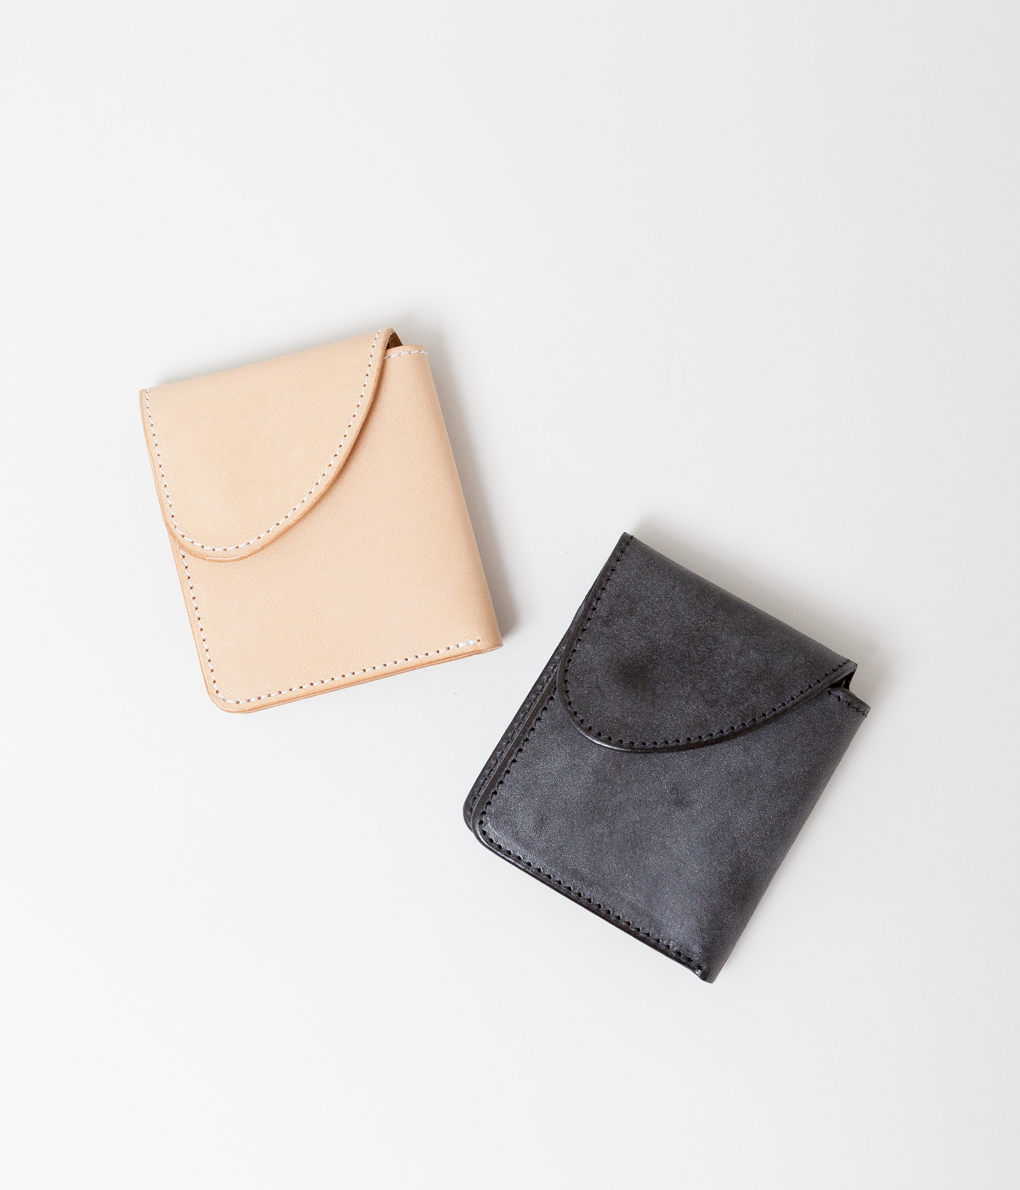 NEW ARRIVAL “HENDER SCHEME 19SS COLLECTION” | MAIDENS SHOP 